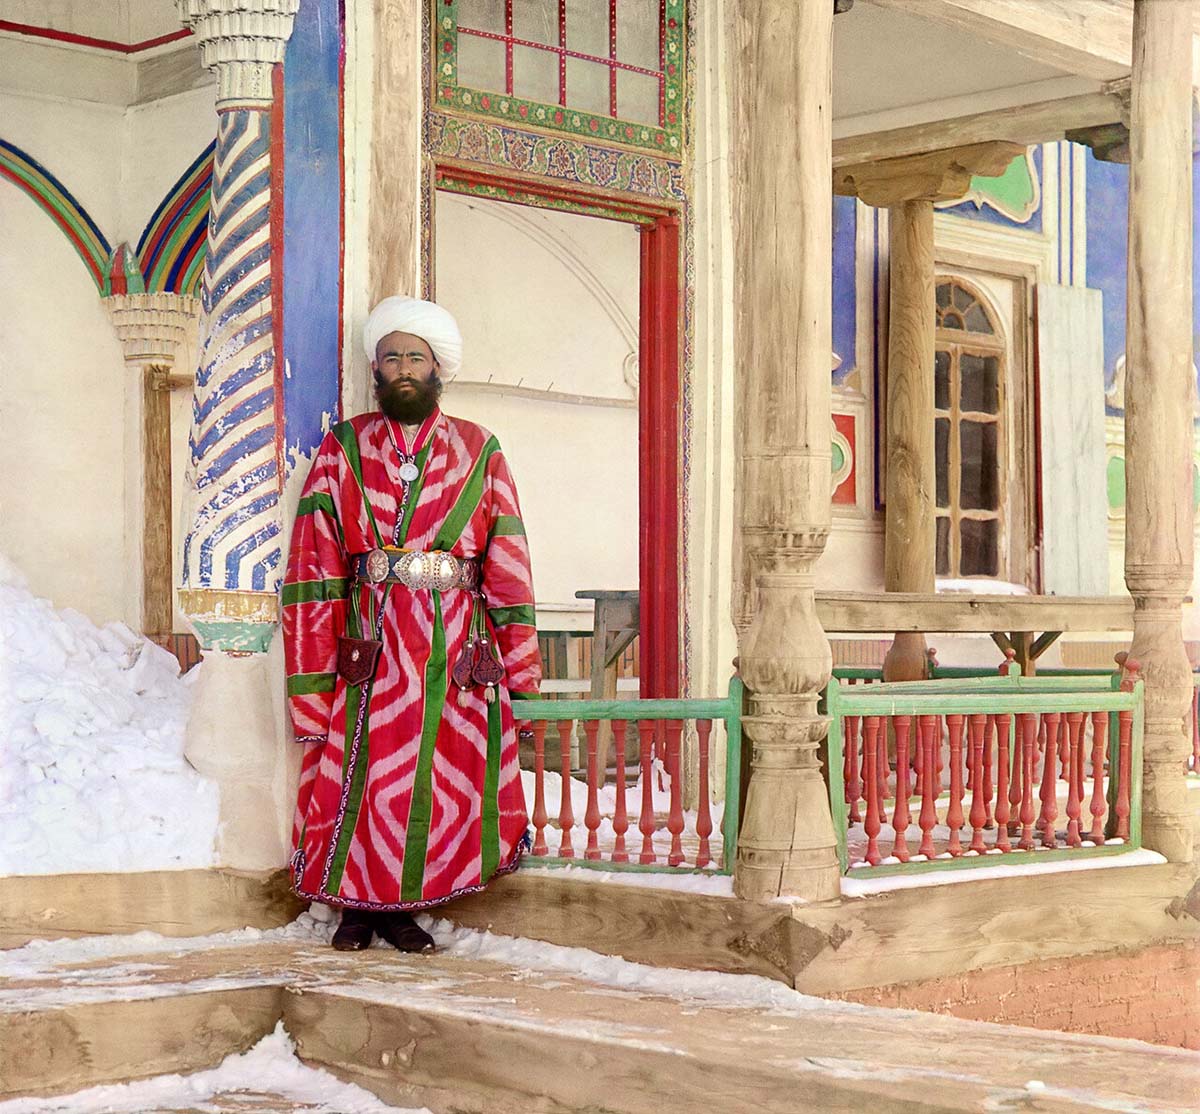 Bukhara official at the Emir's country palace in the garden of Shir-Budun